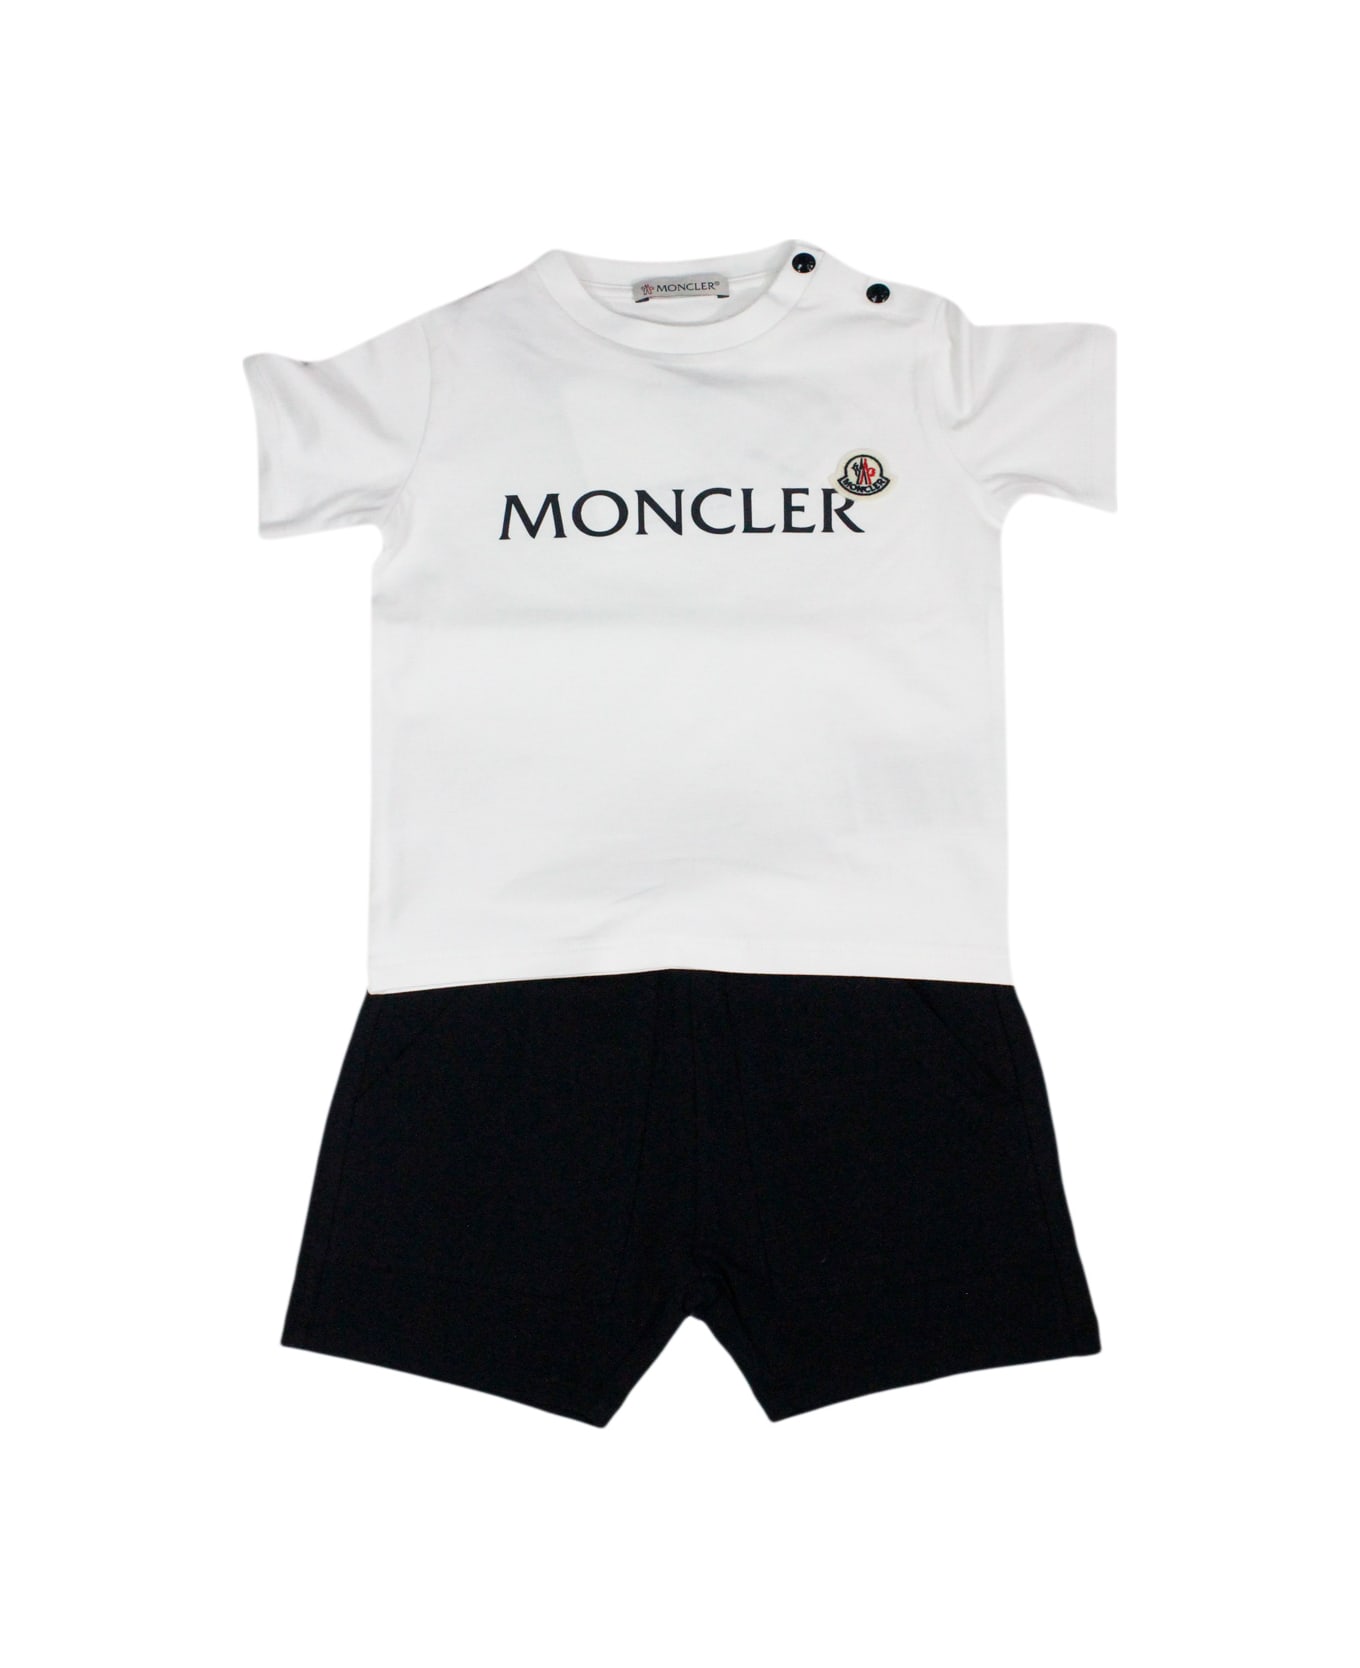 Moncler Complete With Short-sleeved Crew-neck T-shirt And Shorts With Elasticated Waist And Side Pockets. Logo On The Chest - Helmut Lang Hooded Jackets